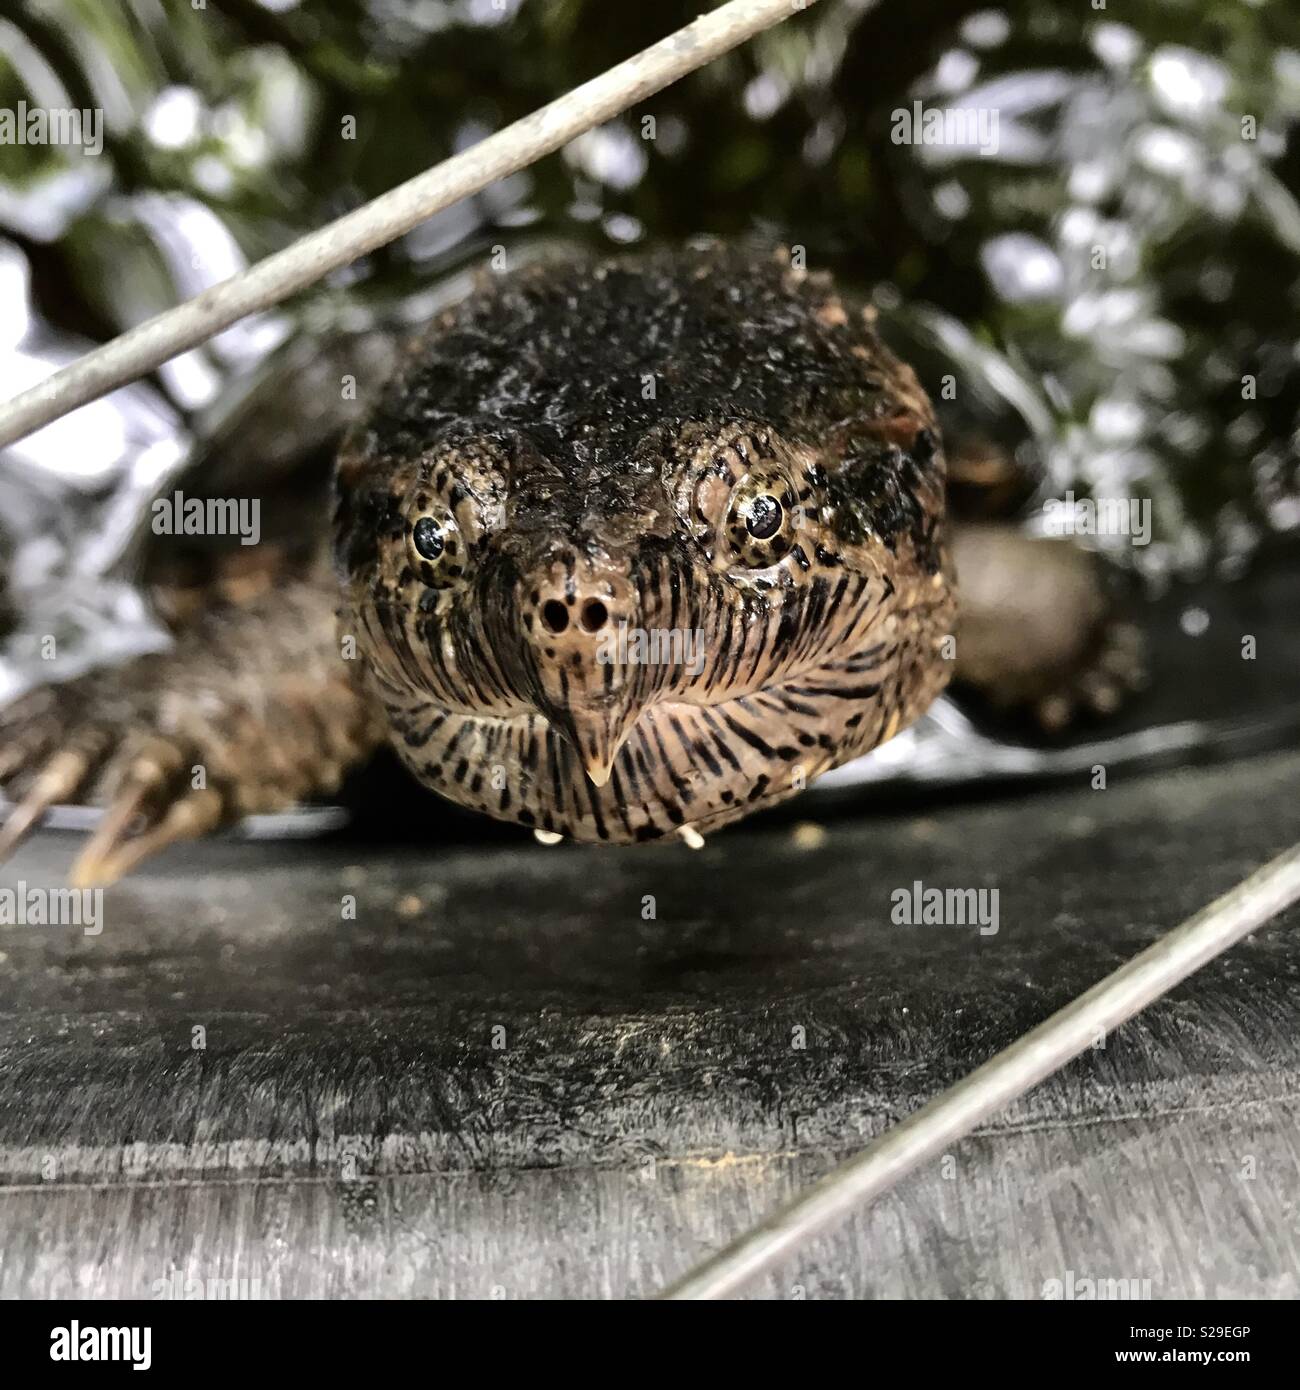 Snapping turtle up close Stock Photo